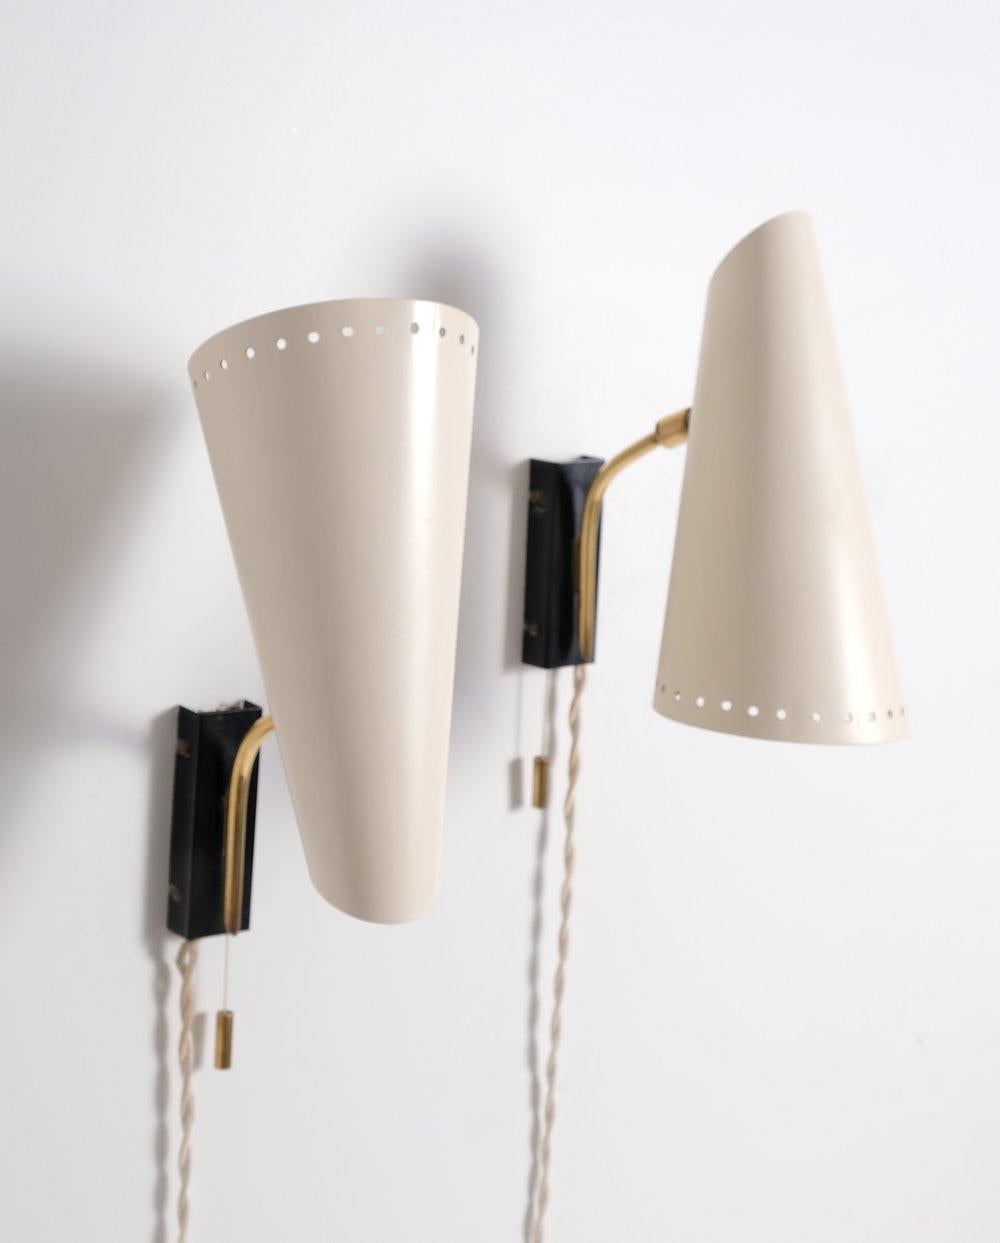 Pair of midcentury German Bedside Lamps or Sconces. Sold as pair. 40 watts E-26 Edison medium base incandescent bulb recommended or higher if LED/CFL.

 Rewired with E-26 Edison base sockets, 18/2 cream coloured cloth cord and polarized north